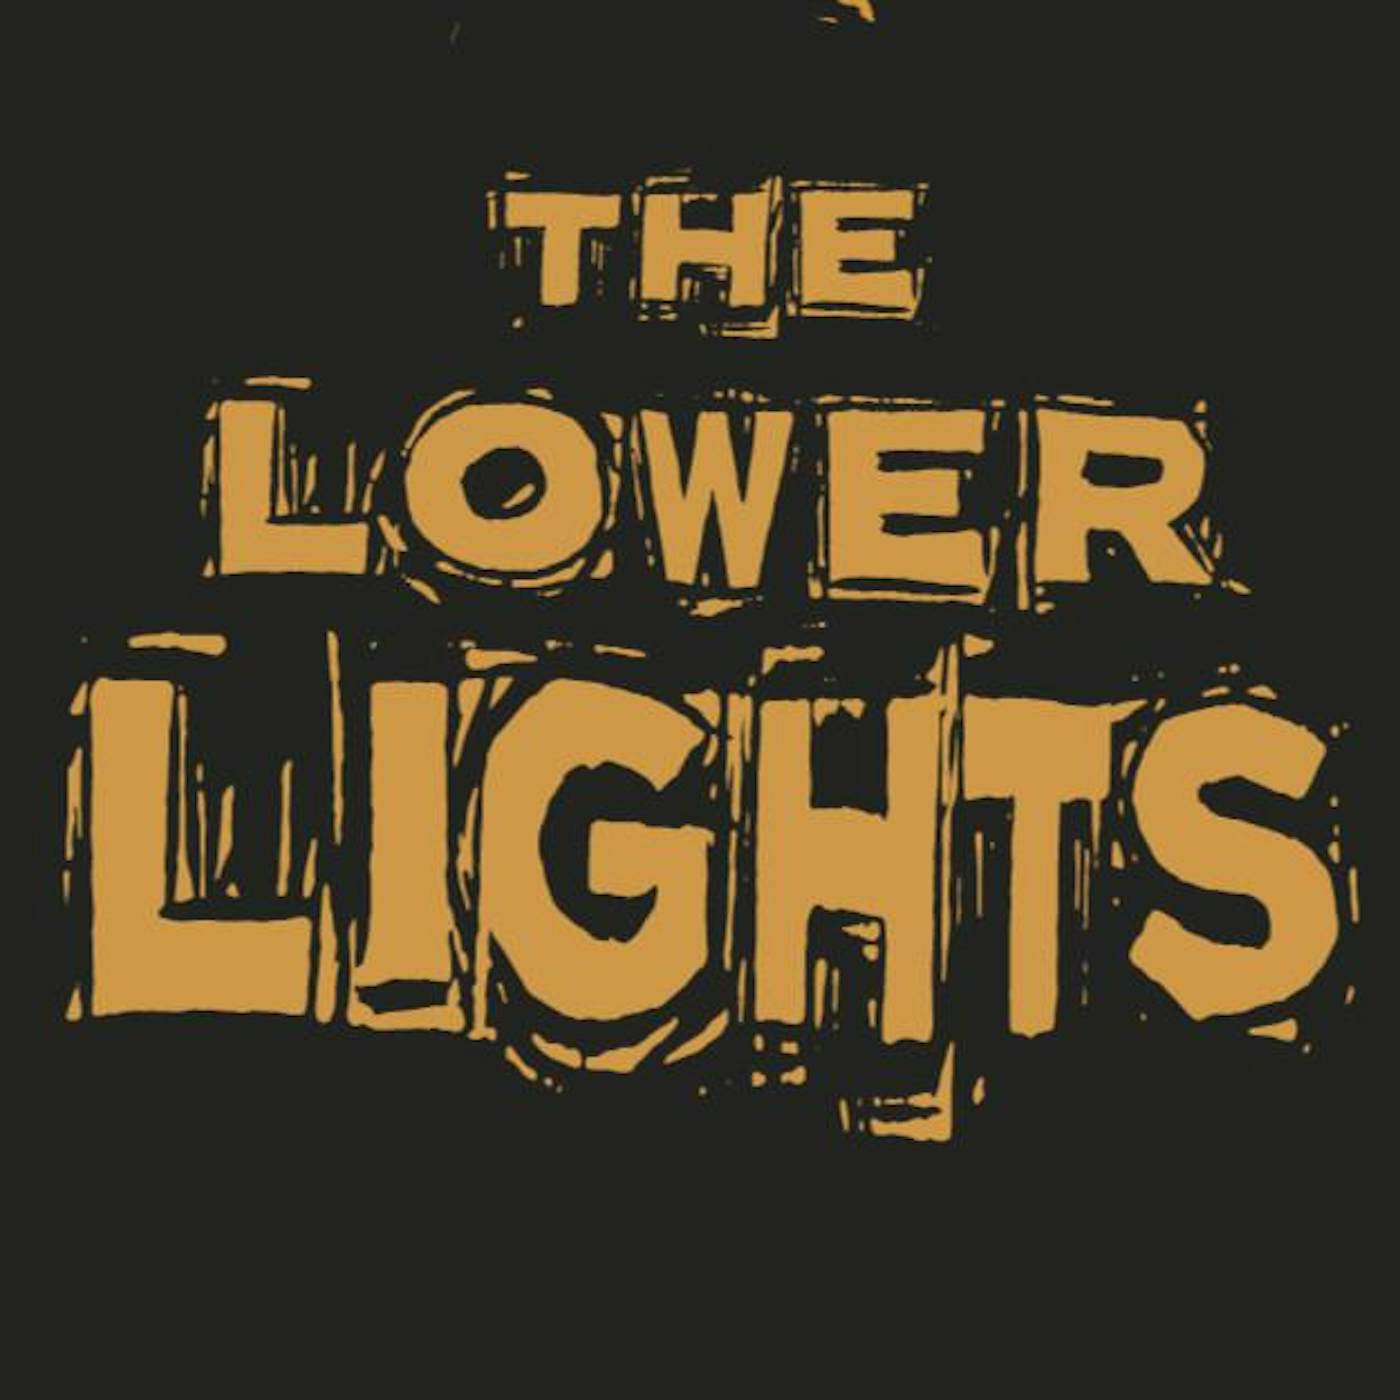 The Lower Lights